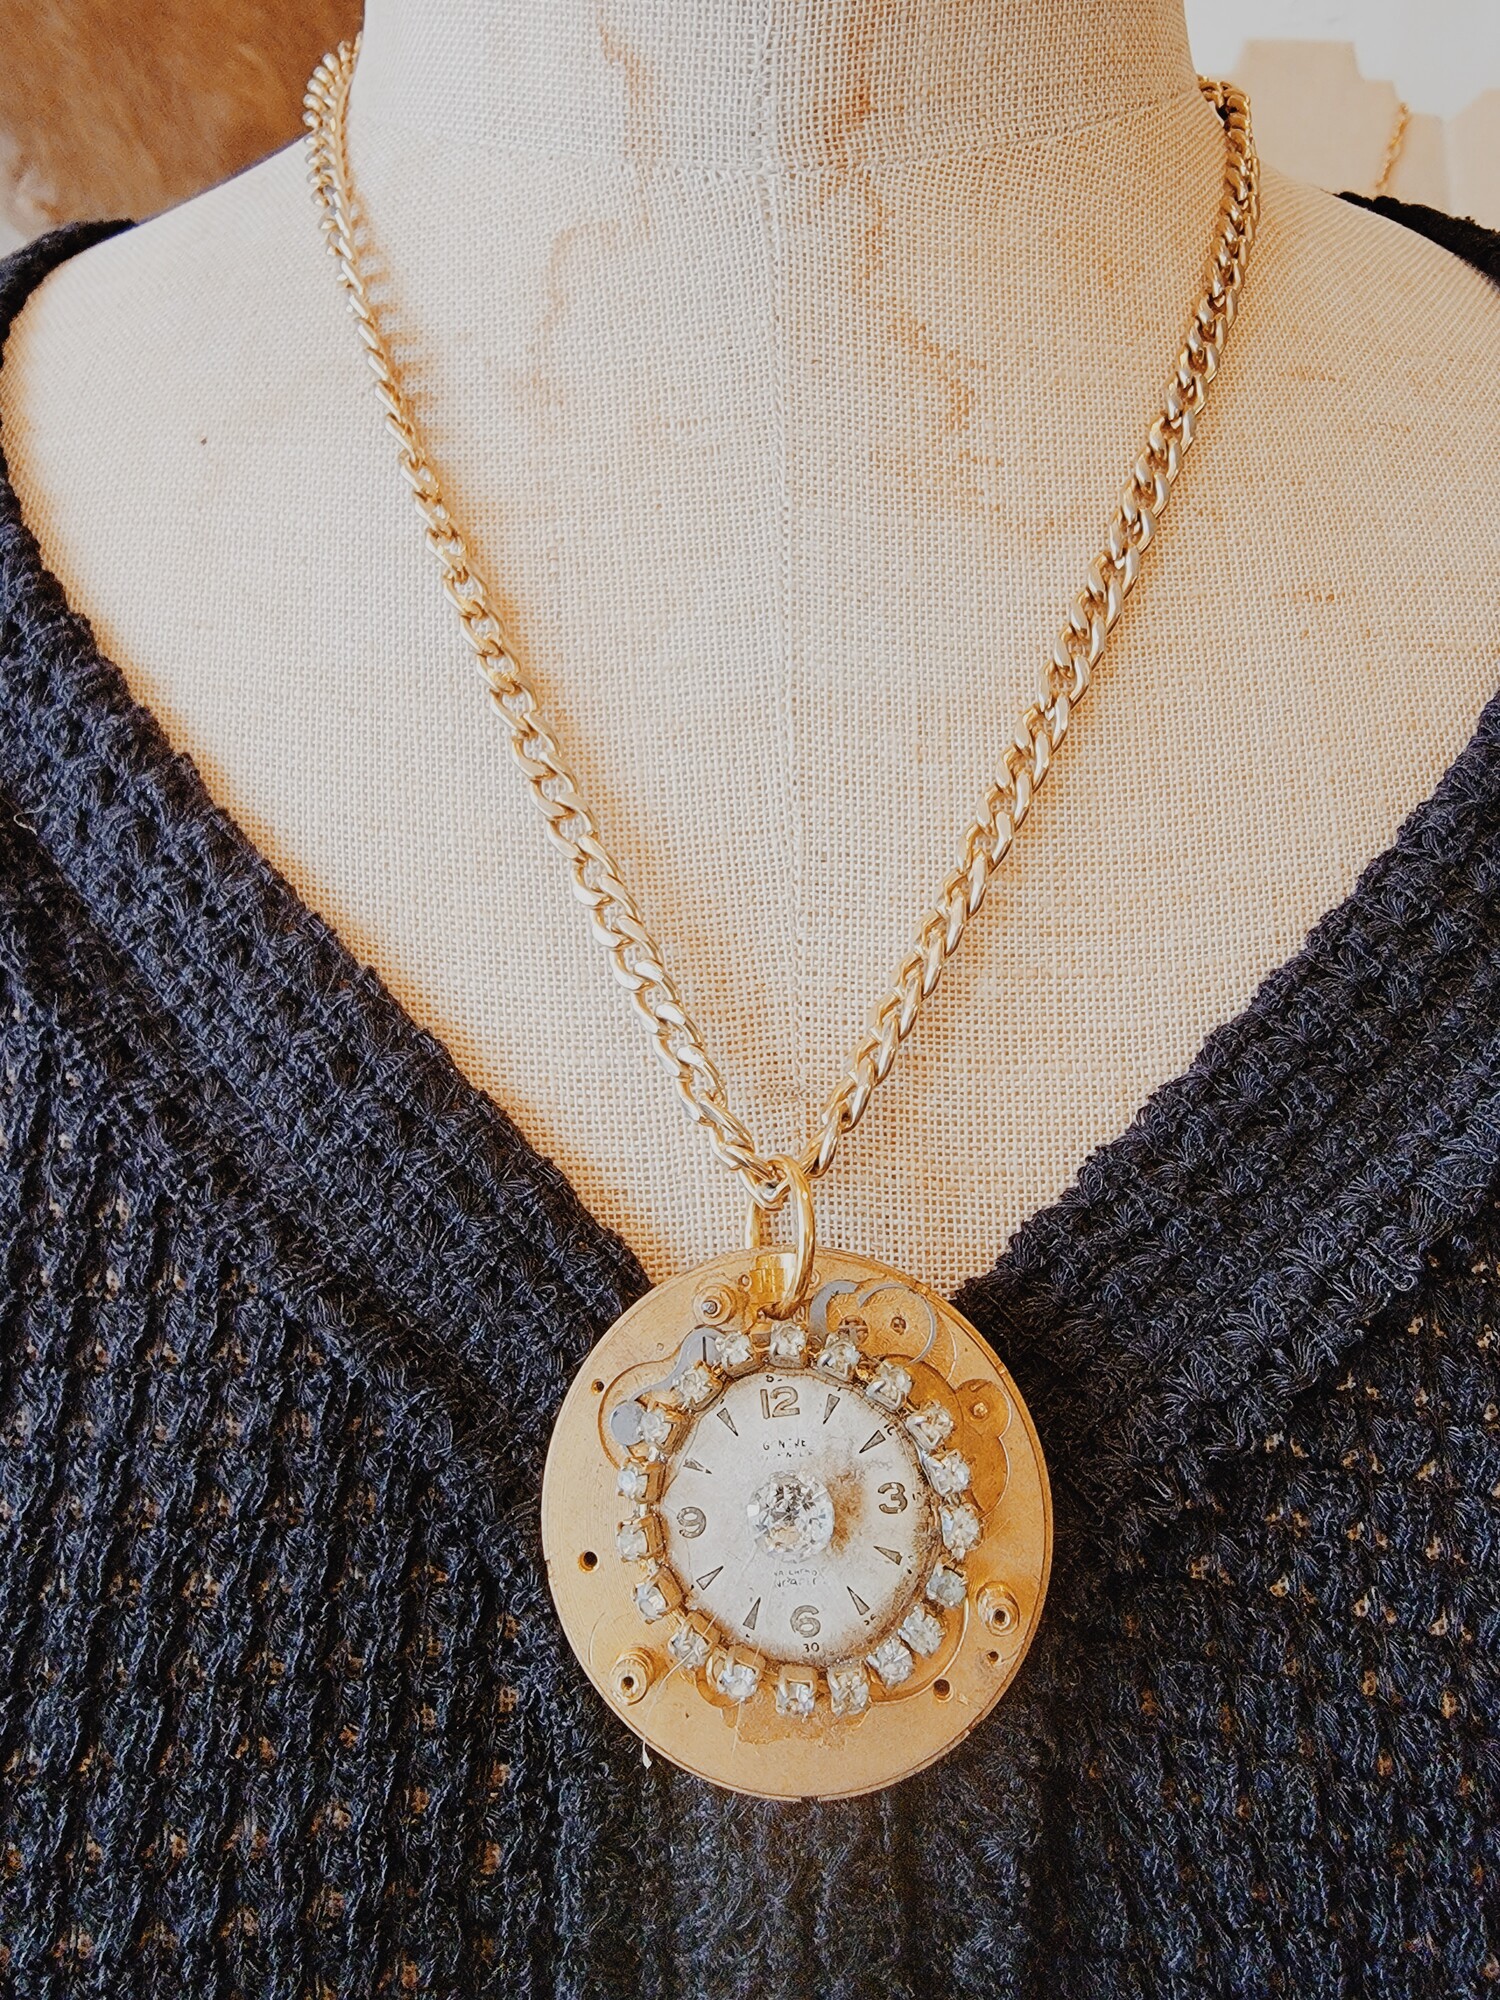 This hand crafted necklace has a vintage watch face on its pendant circled in rhinestones!
Chain: 21 Inches